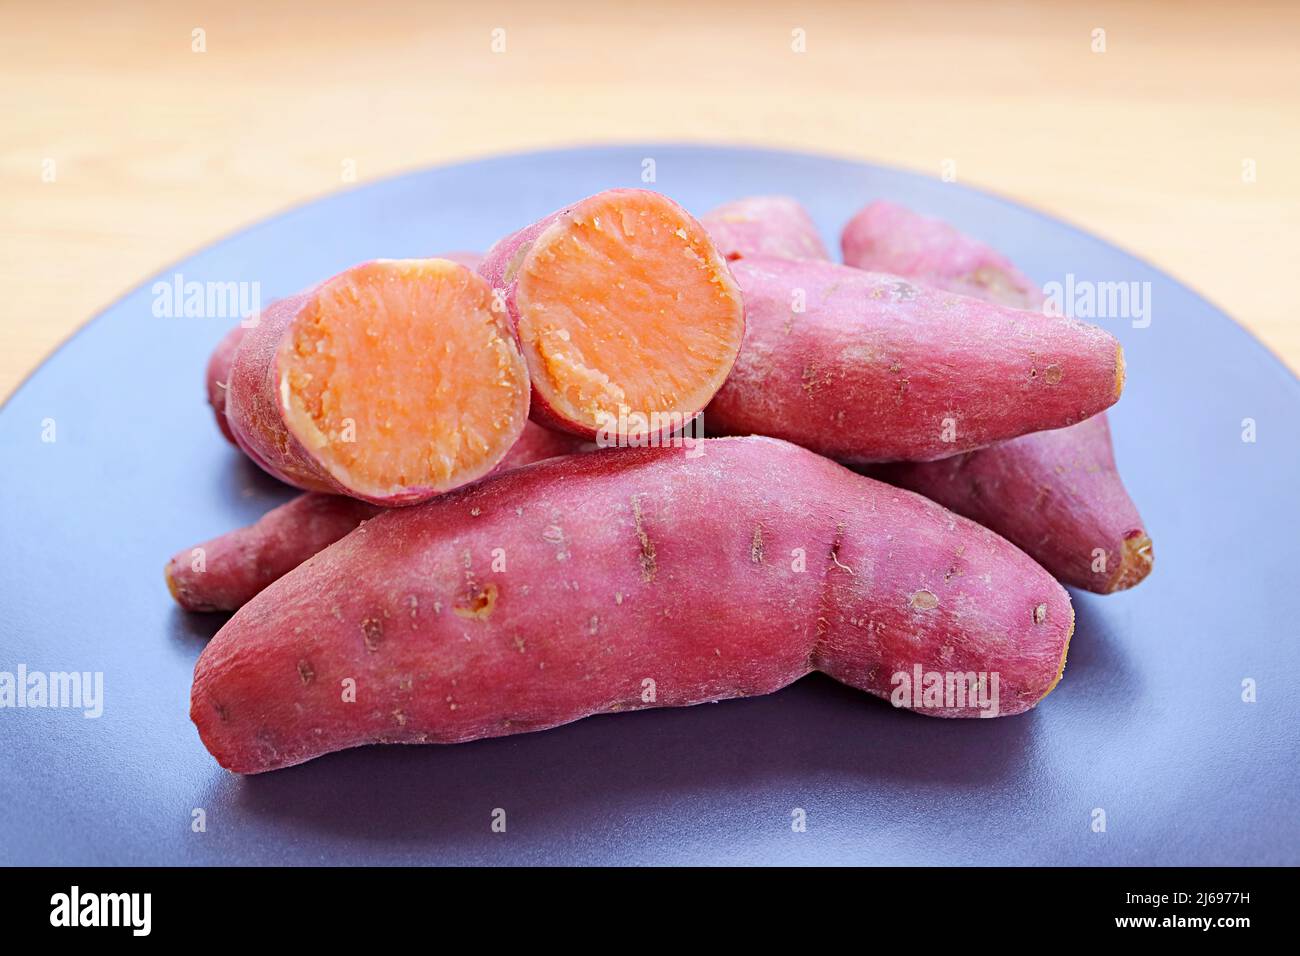 Plate of Tasty Boiled Sweet Potatoes for a Concept of Whole Foods Plant-based Diet Stock Photo